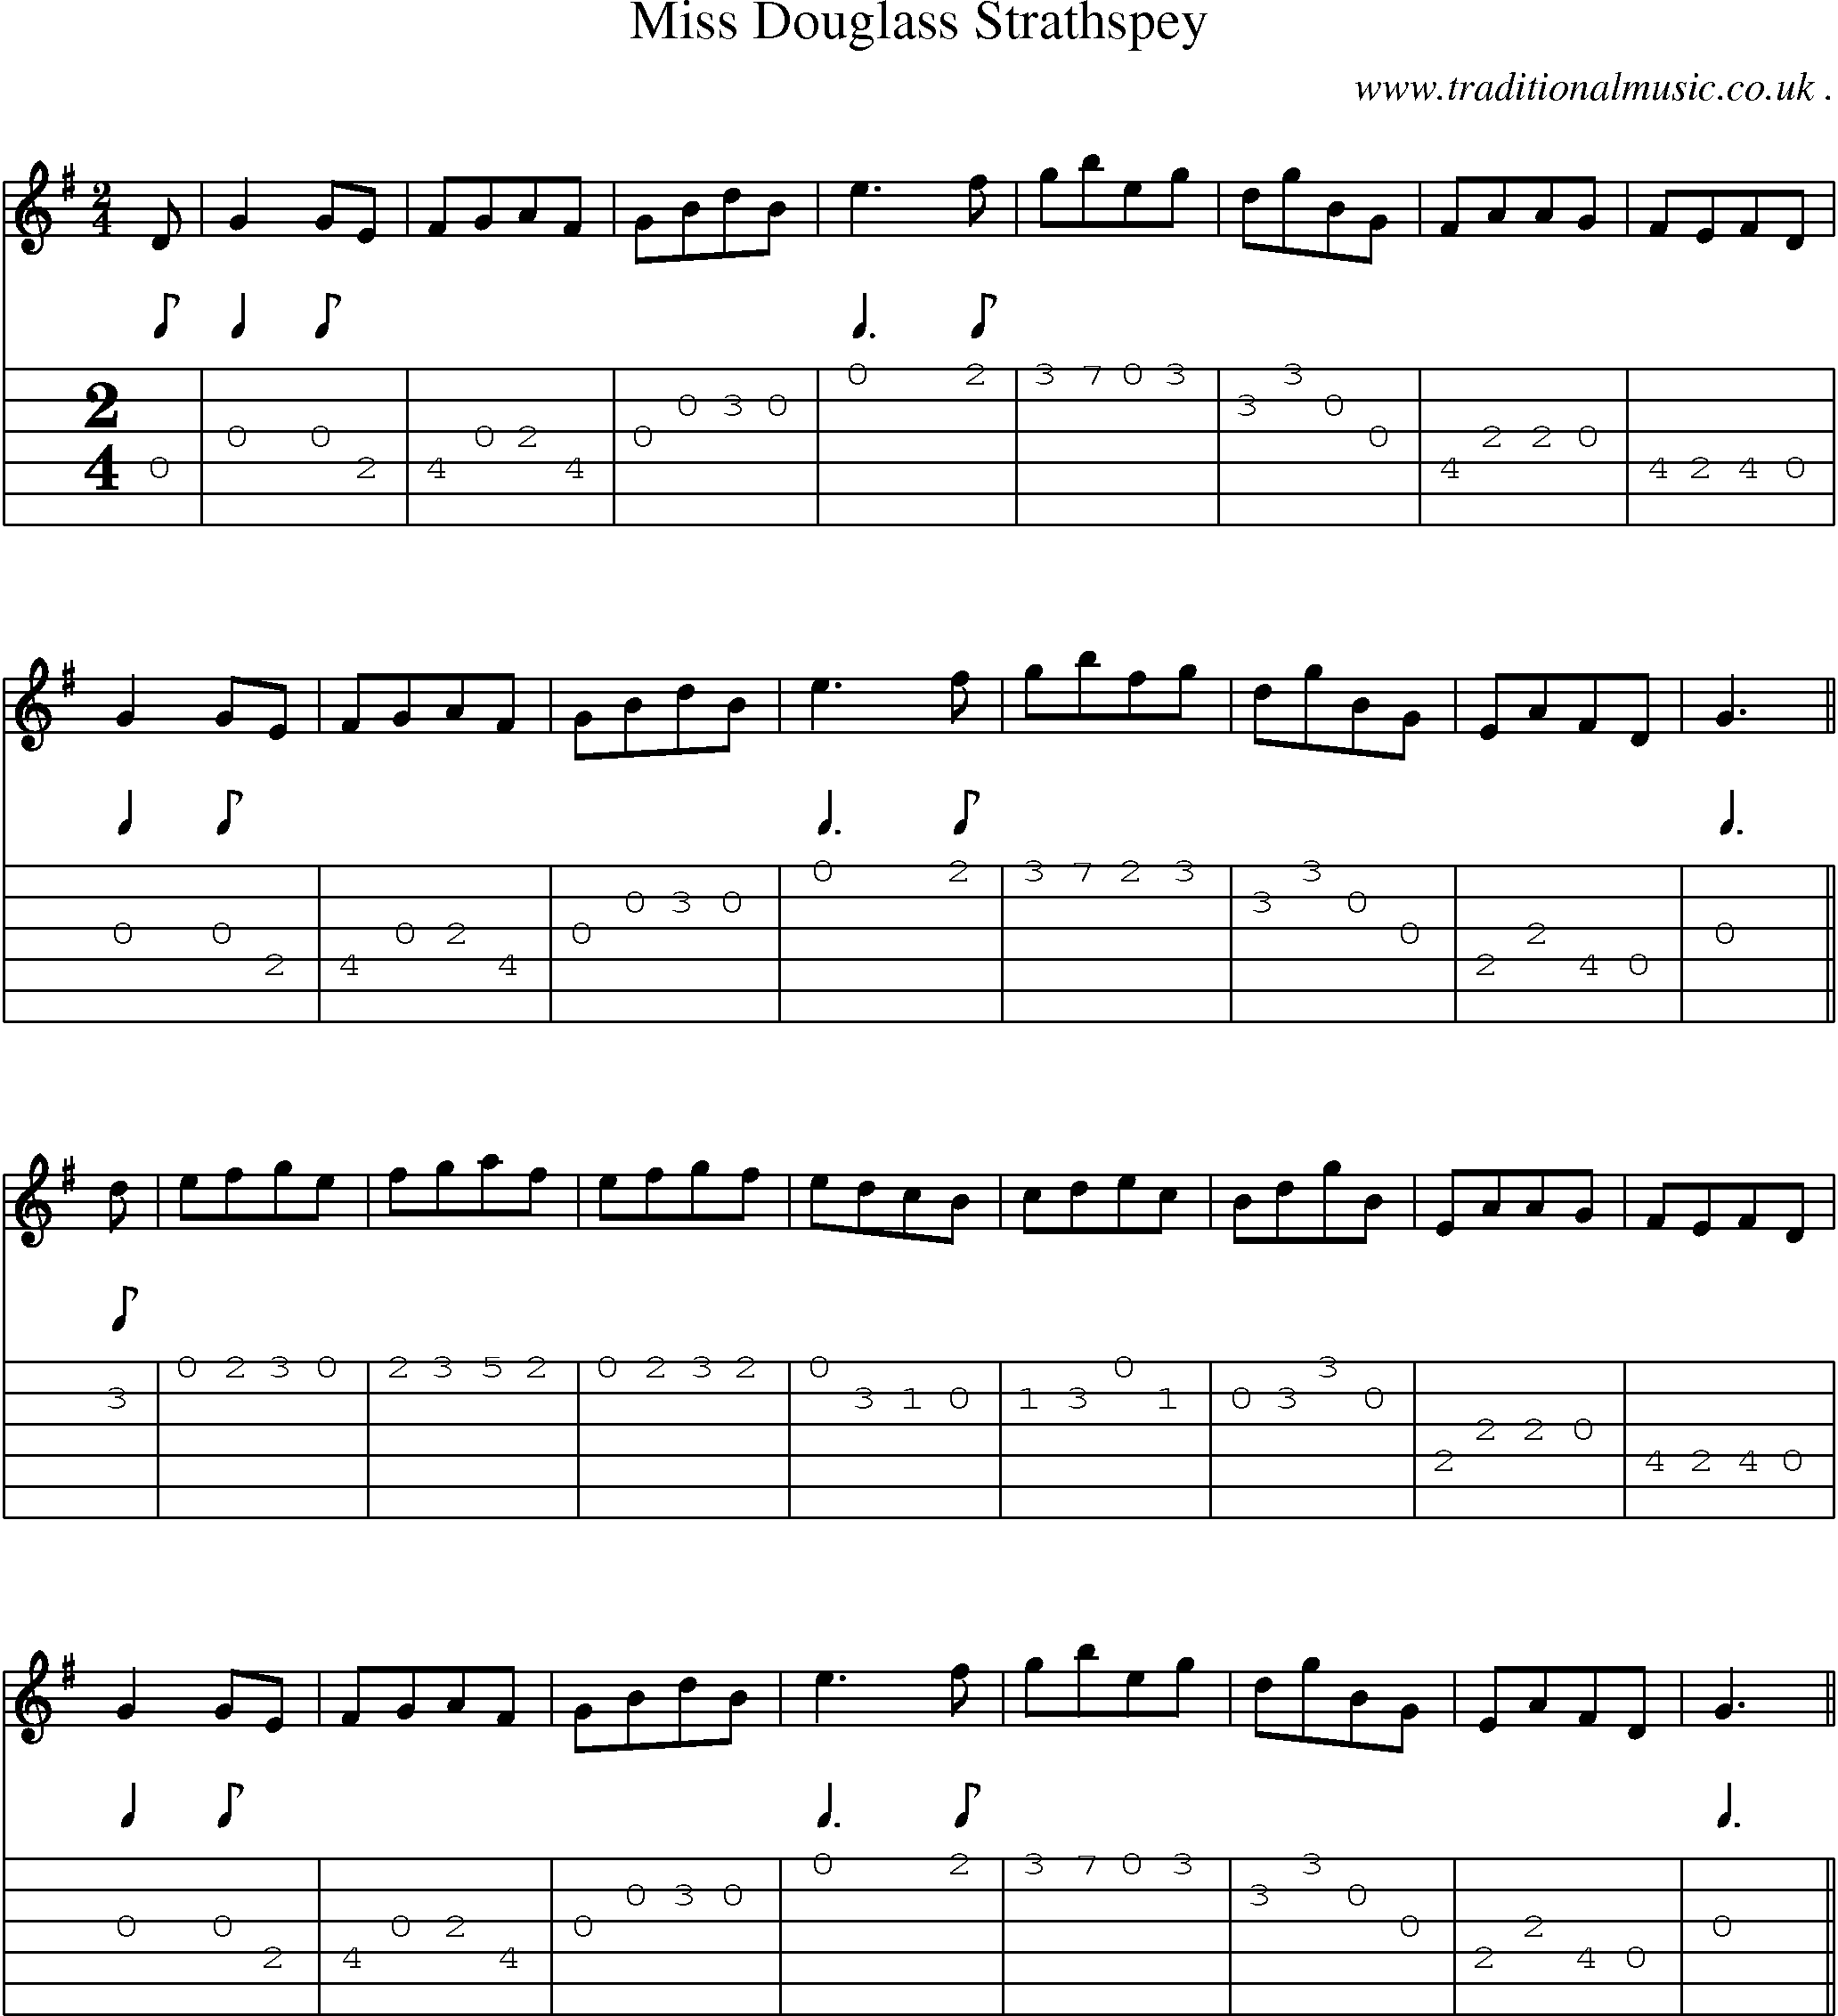 Sheet-Music and Guitar Tabs for Miss Douglass Strathspey